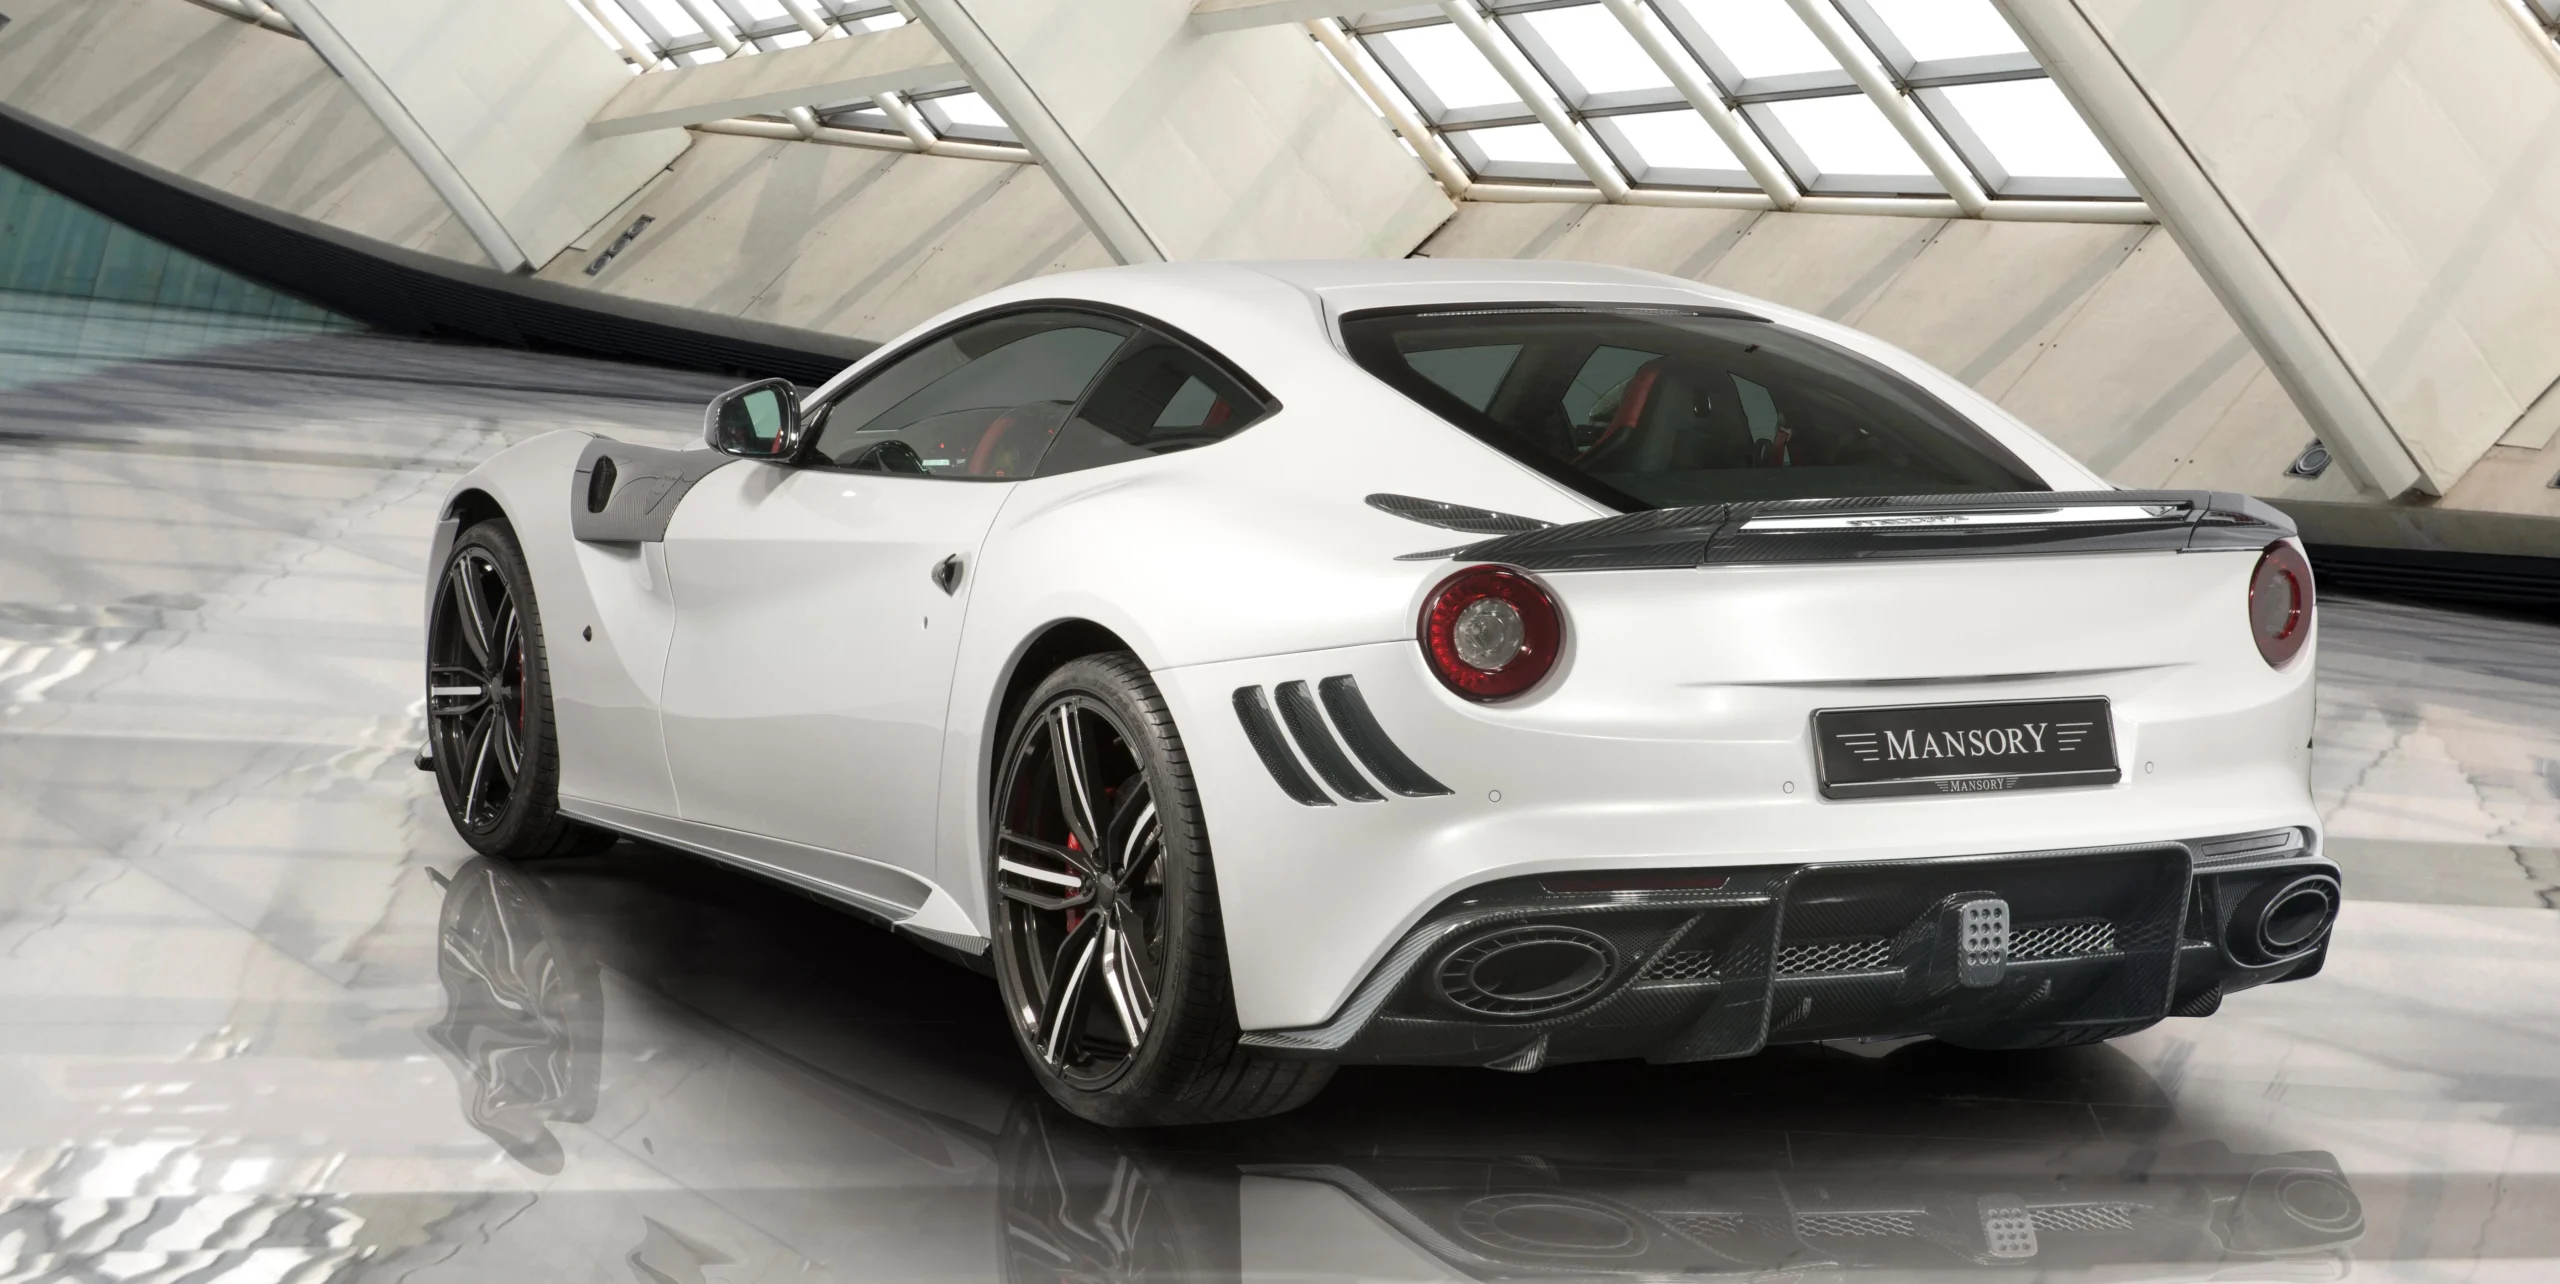 ferrari f12 mansory - How much does a Mansory 812 cost